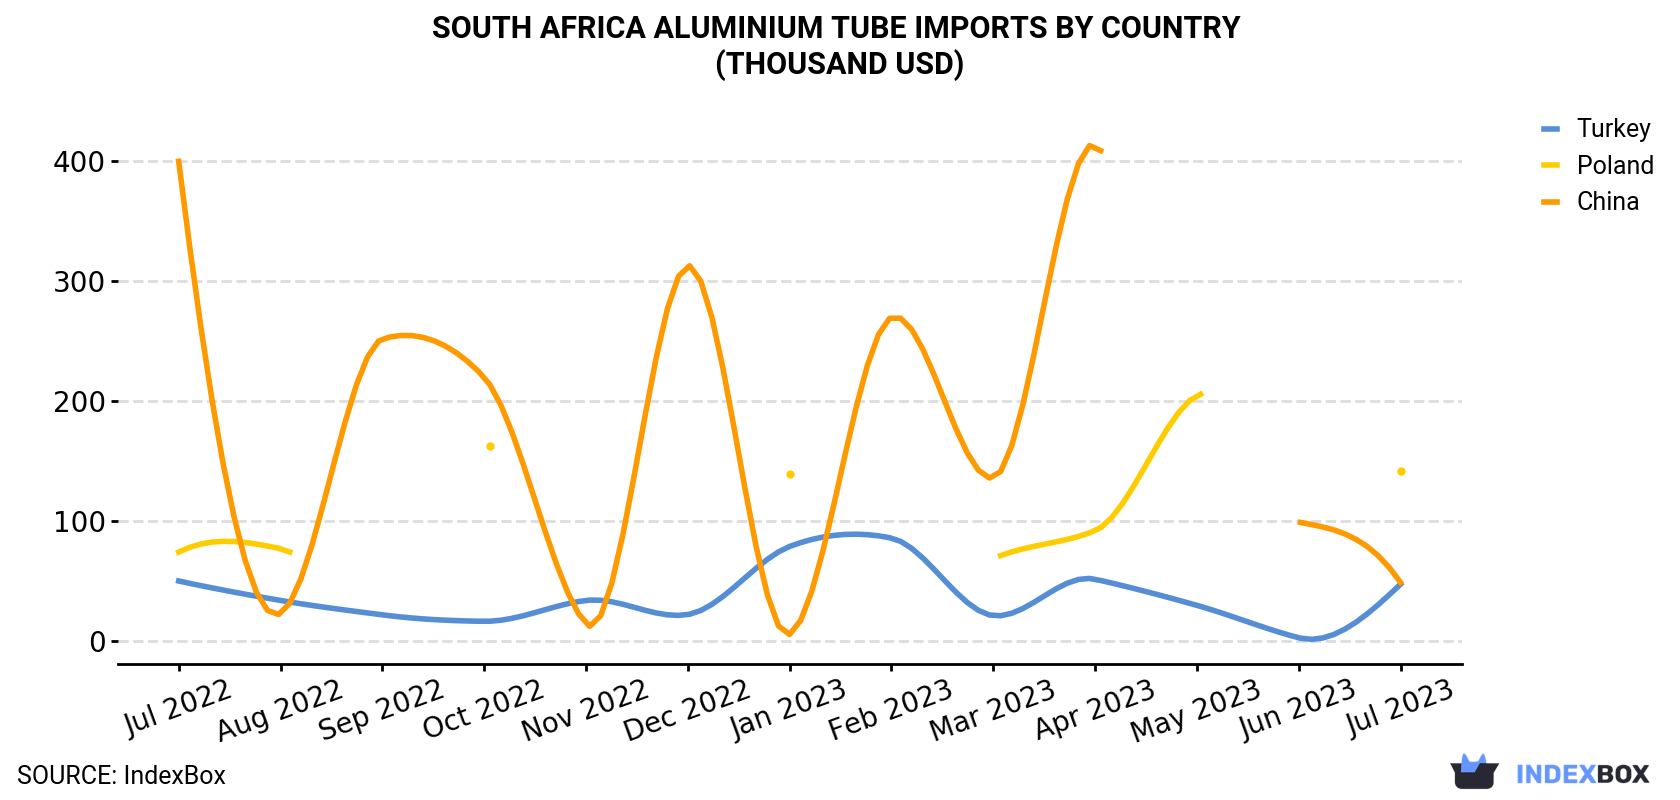 South Africa Aluminium Tube Imports By Country (Thousand USD)